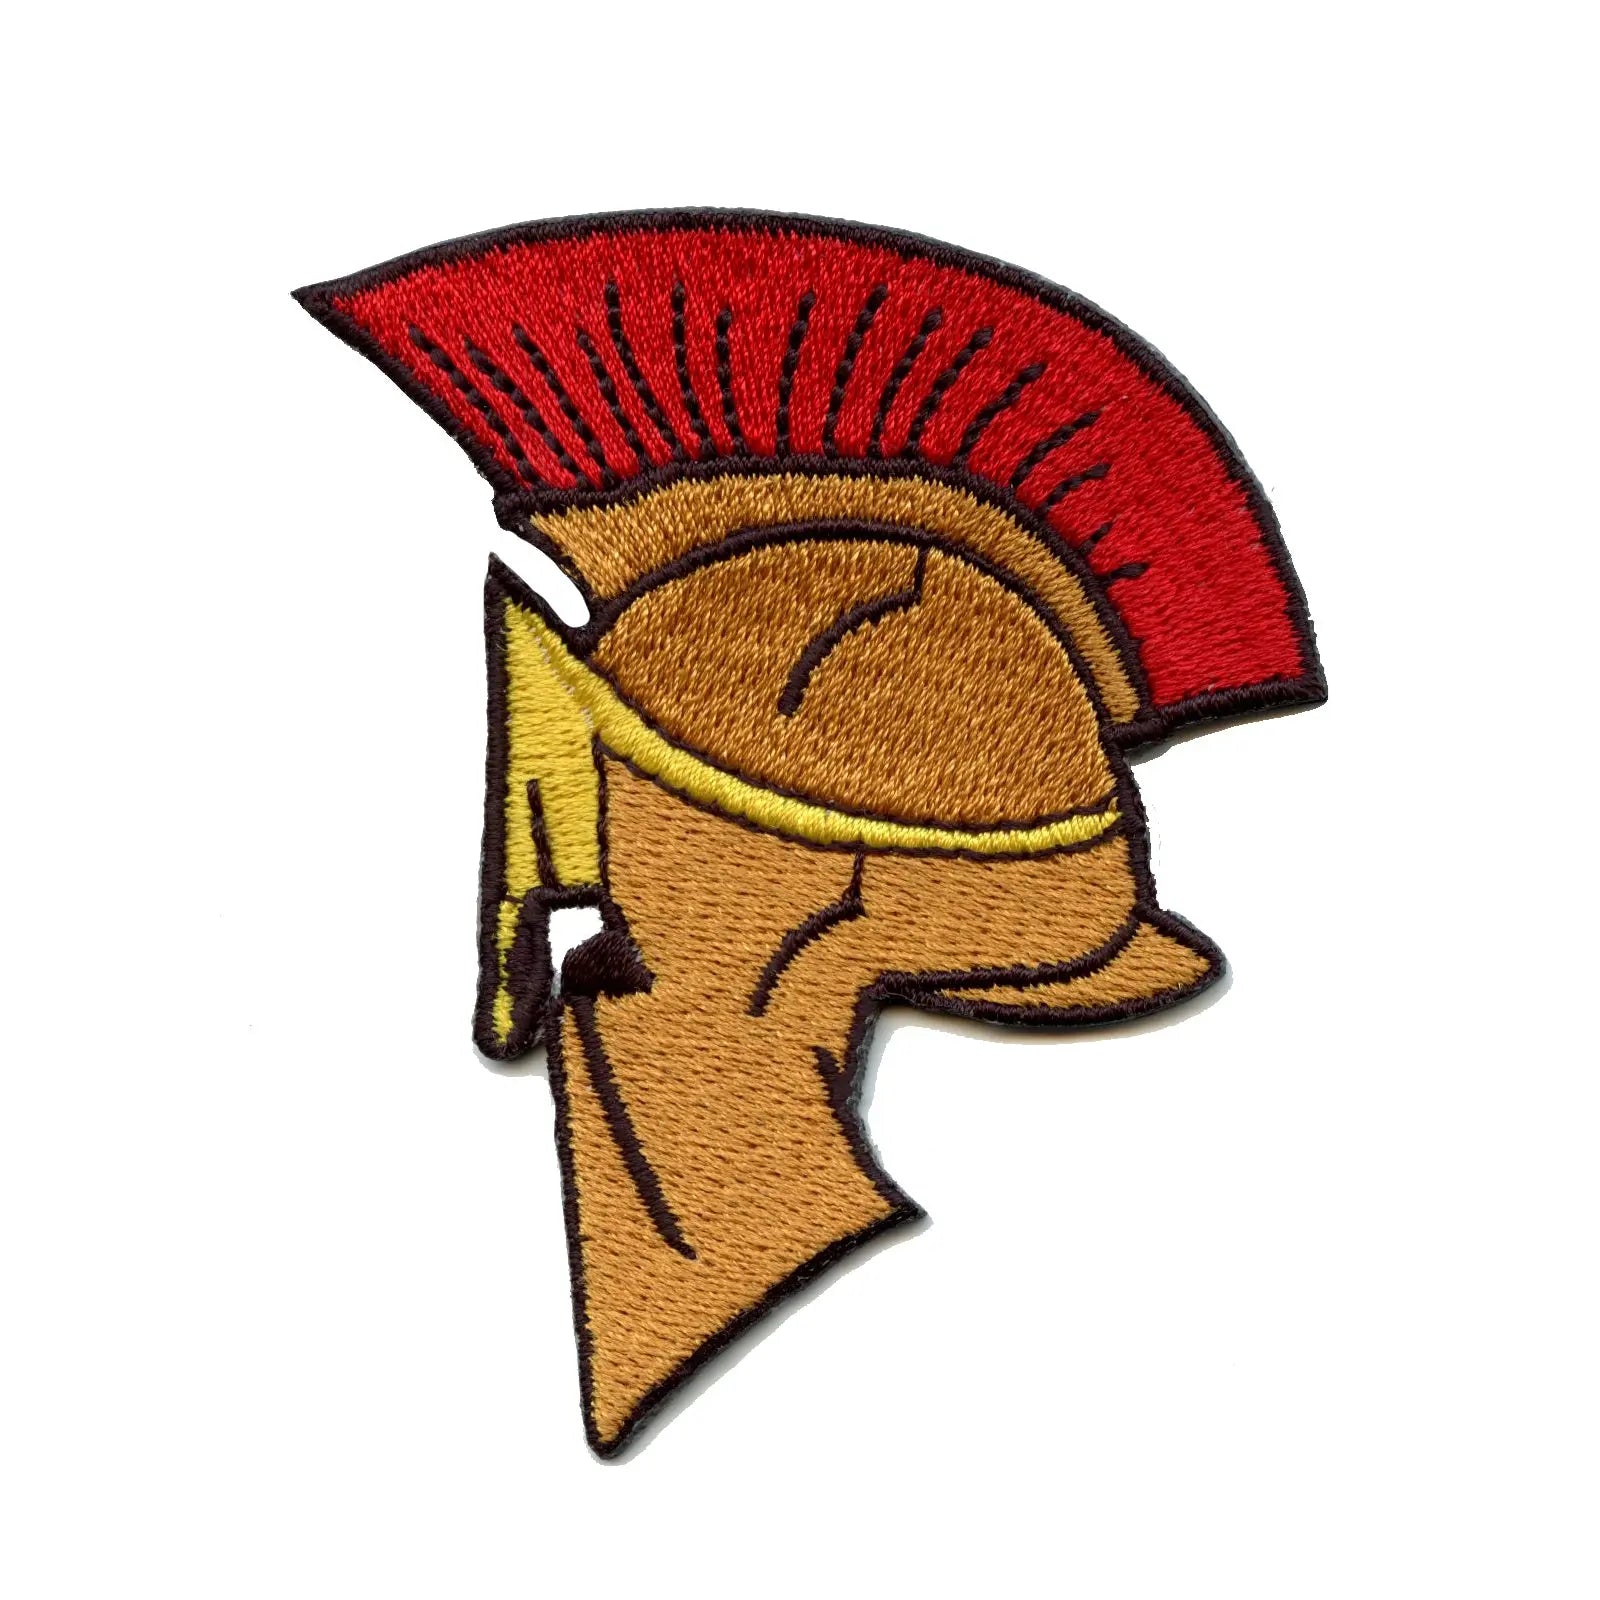 Spartan Helmet Embroidered Iron On Patch 